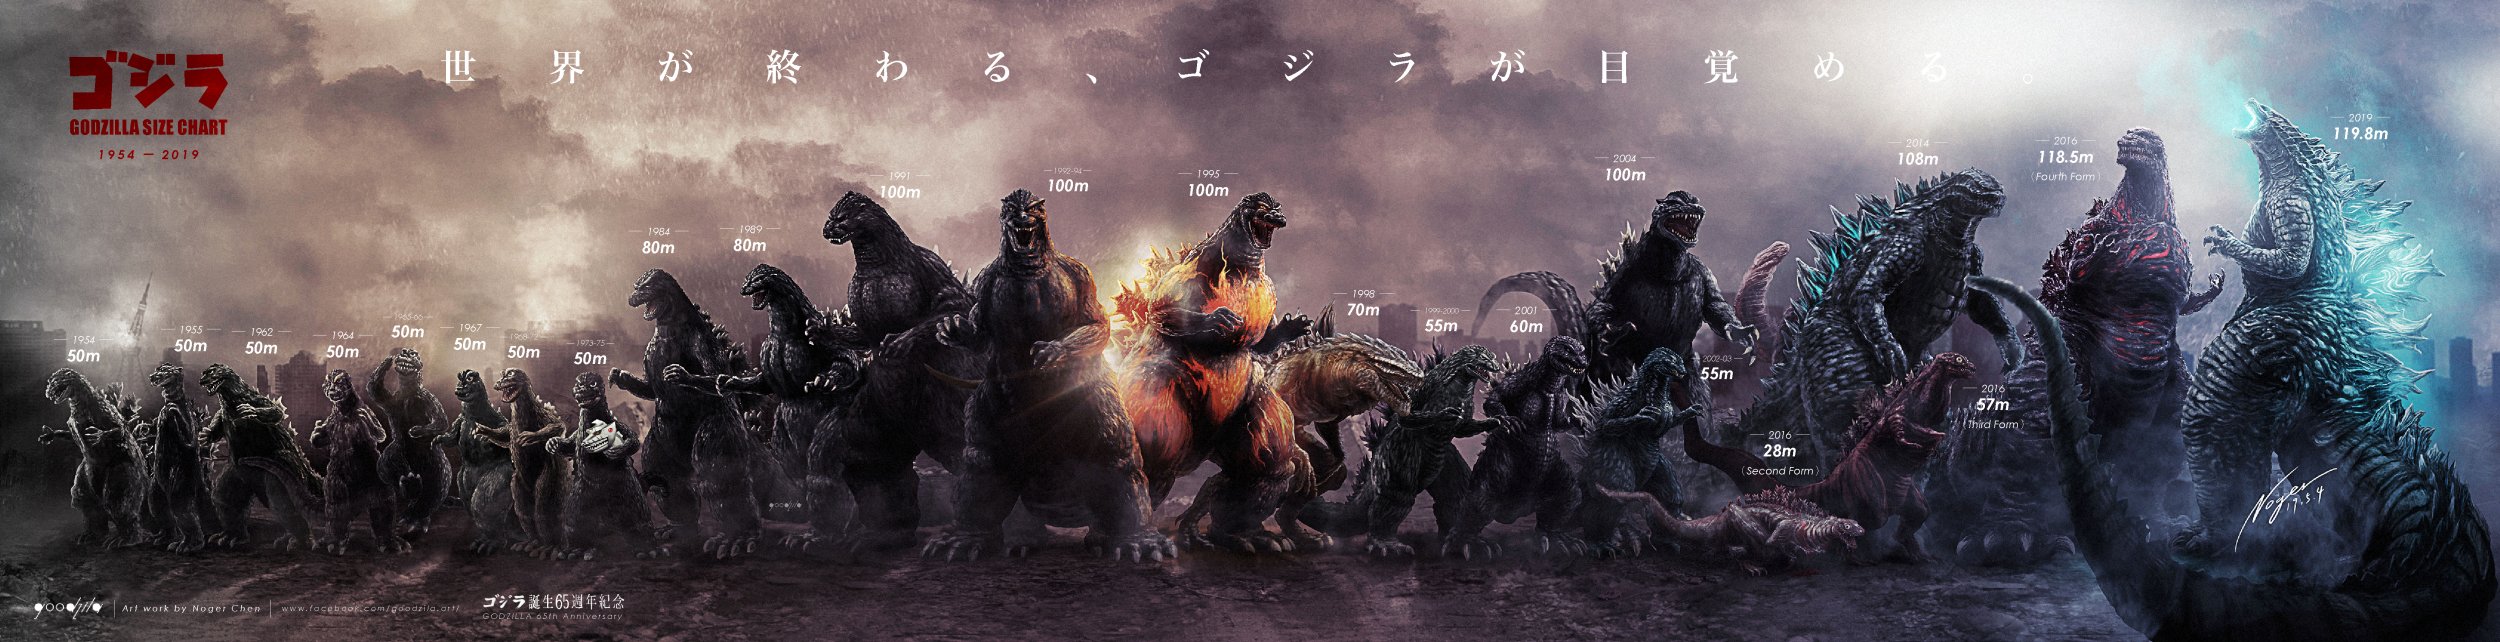 Godzilla' Size Chart Shows How Much the 'King of Monsters ...